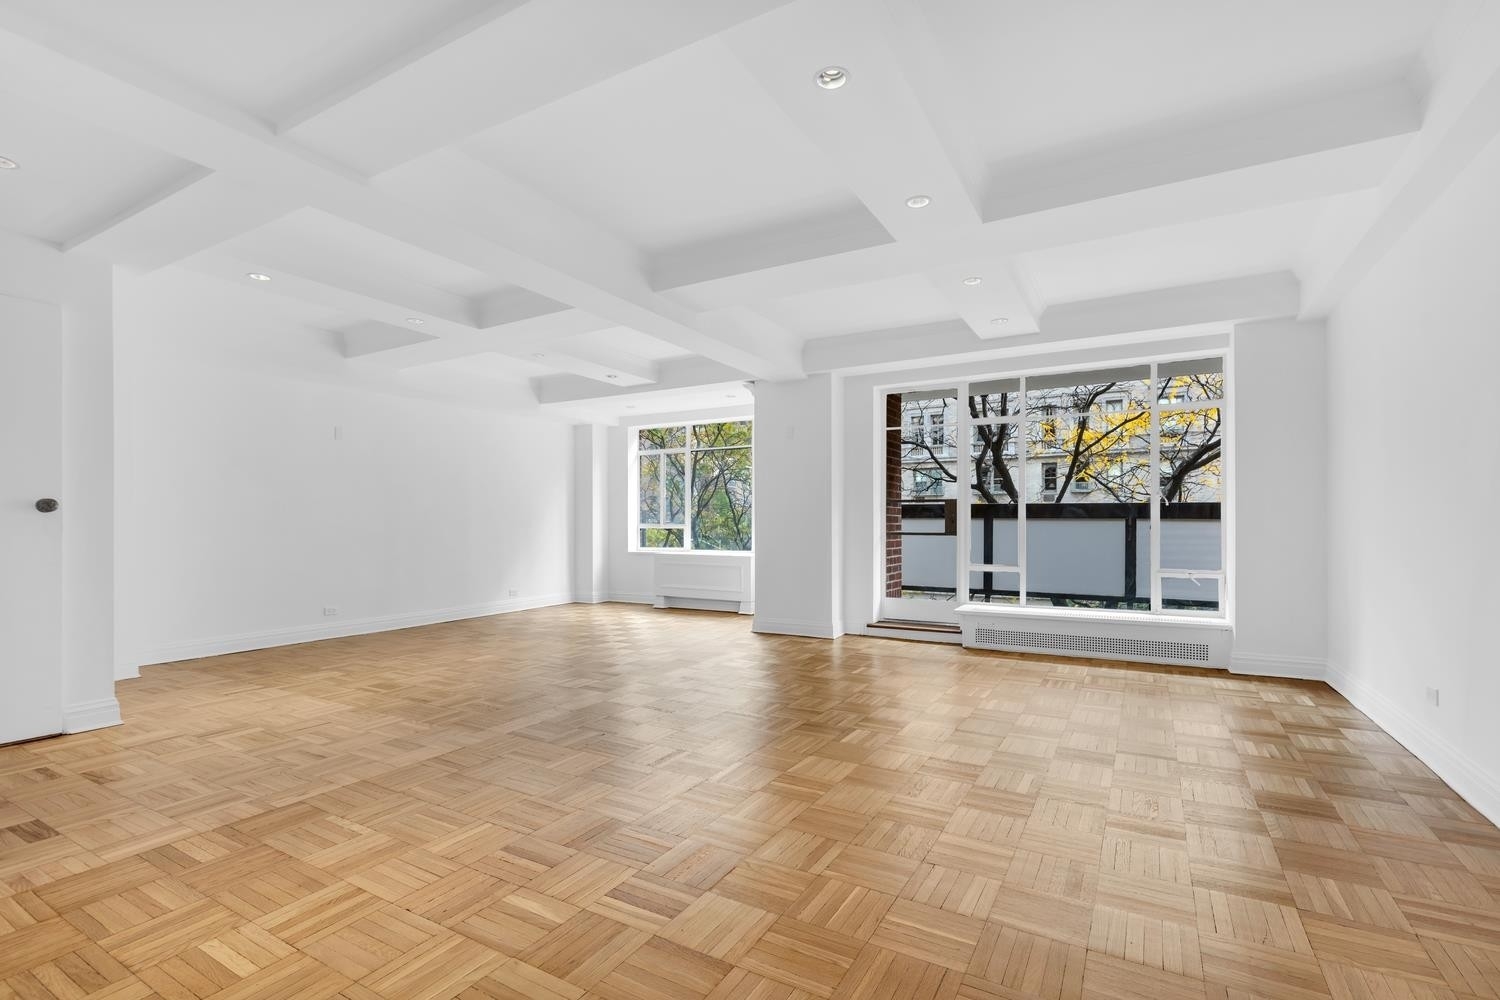 Co-op Properties for Sale at 750 PARK AVE, 4BC Lenox Hill, New York, NY 10021